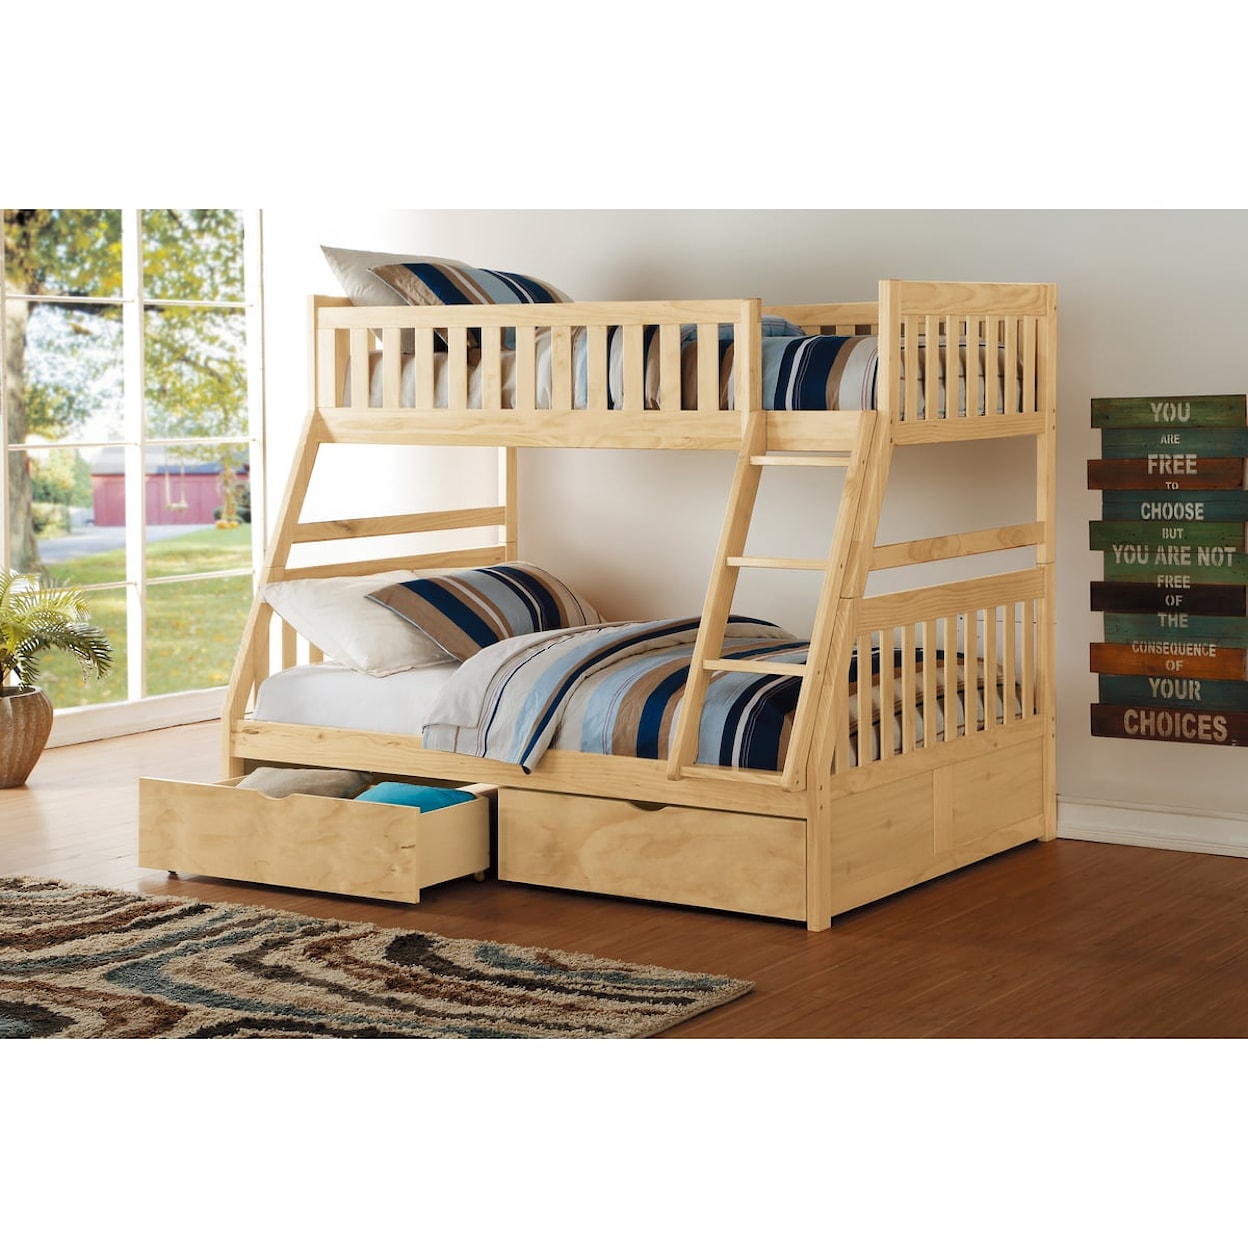 Homelegance Bartly Twin/Full Bunk Bed with Storage Boxes